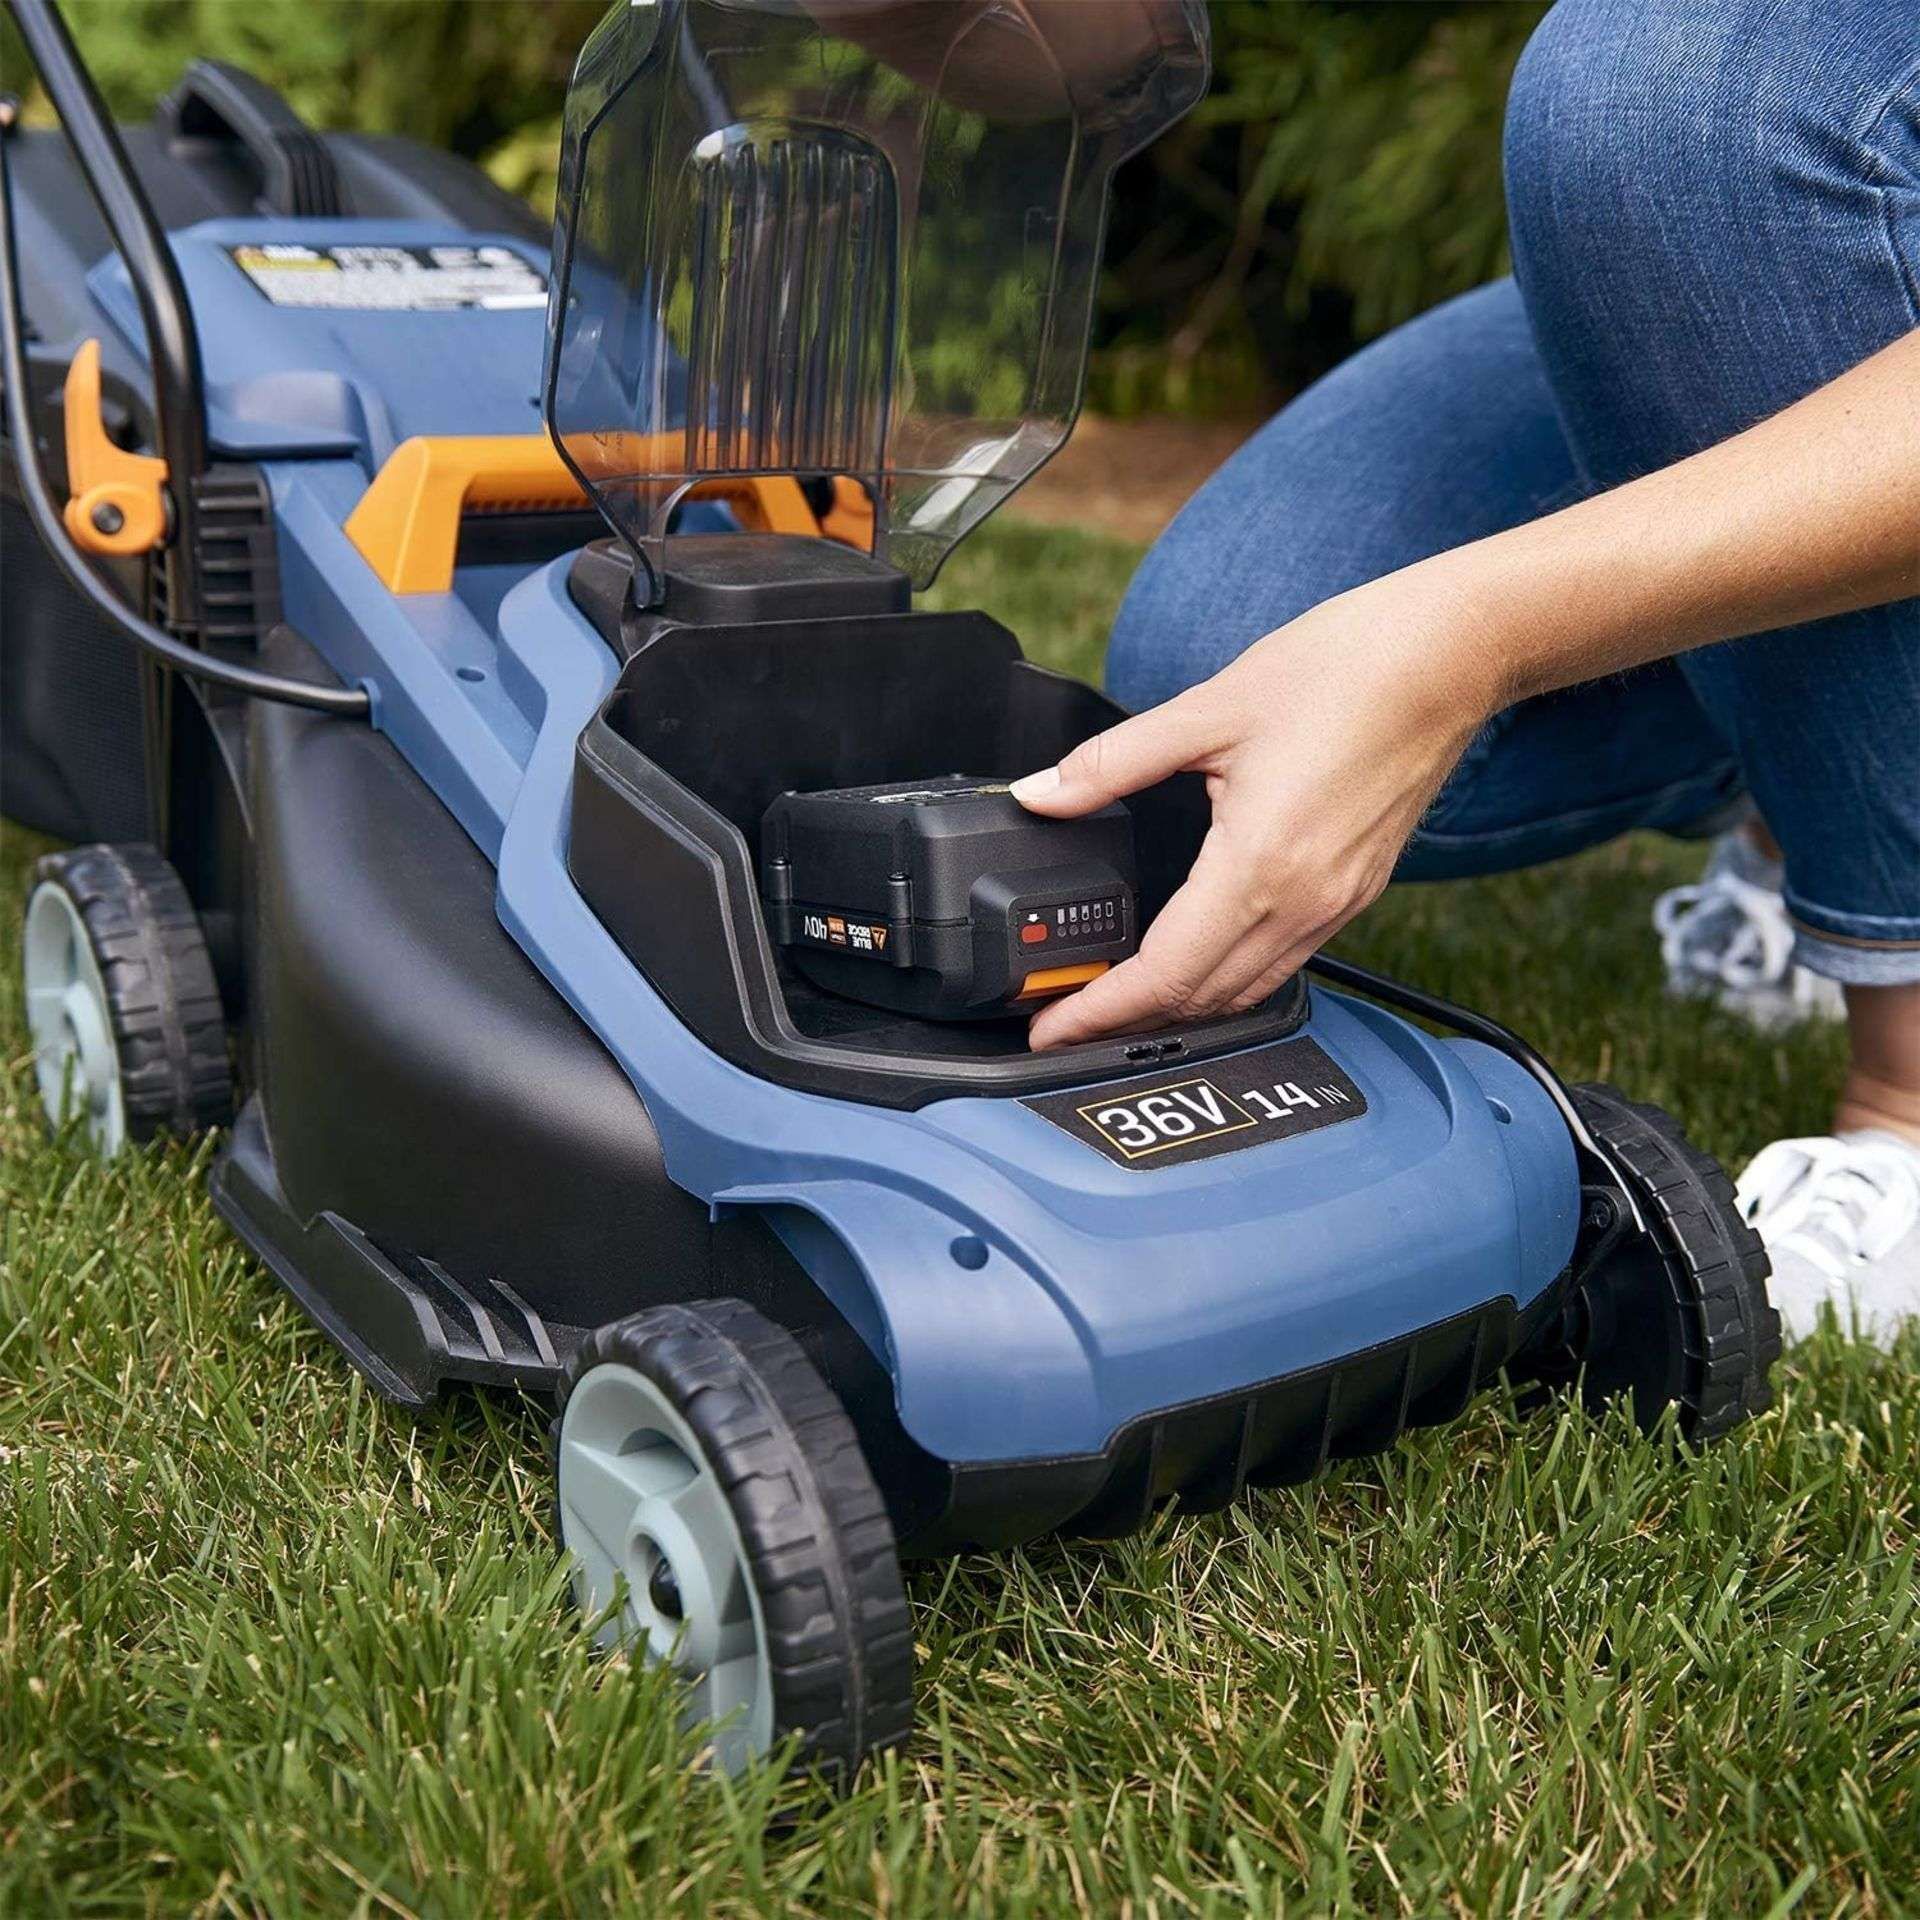 NEW & BOXED BLUE RIDGE 36V Cordless Lawnmower with 2.0 Ah Li-ion Battery. RRP £229 EACH. Powerful - Image 2 of 4